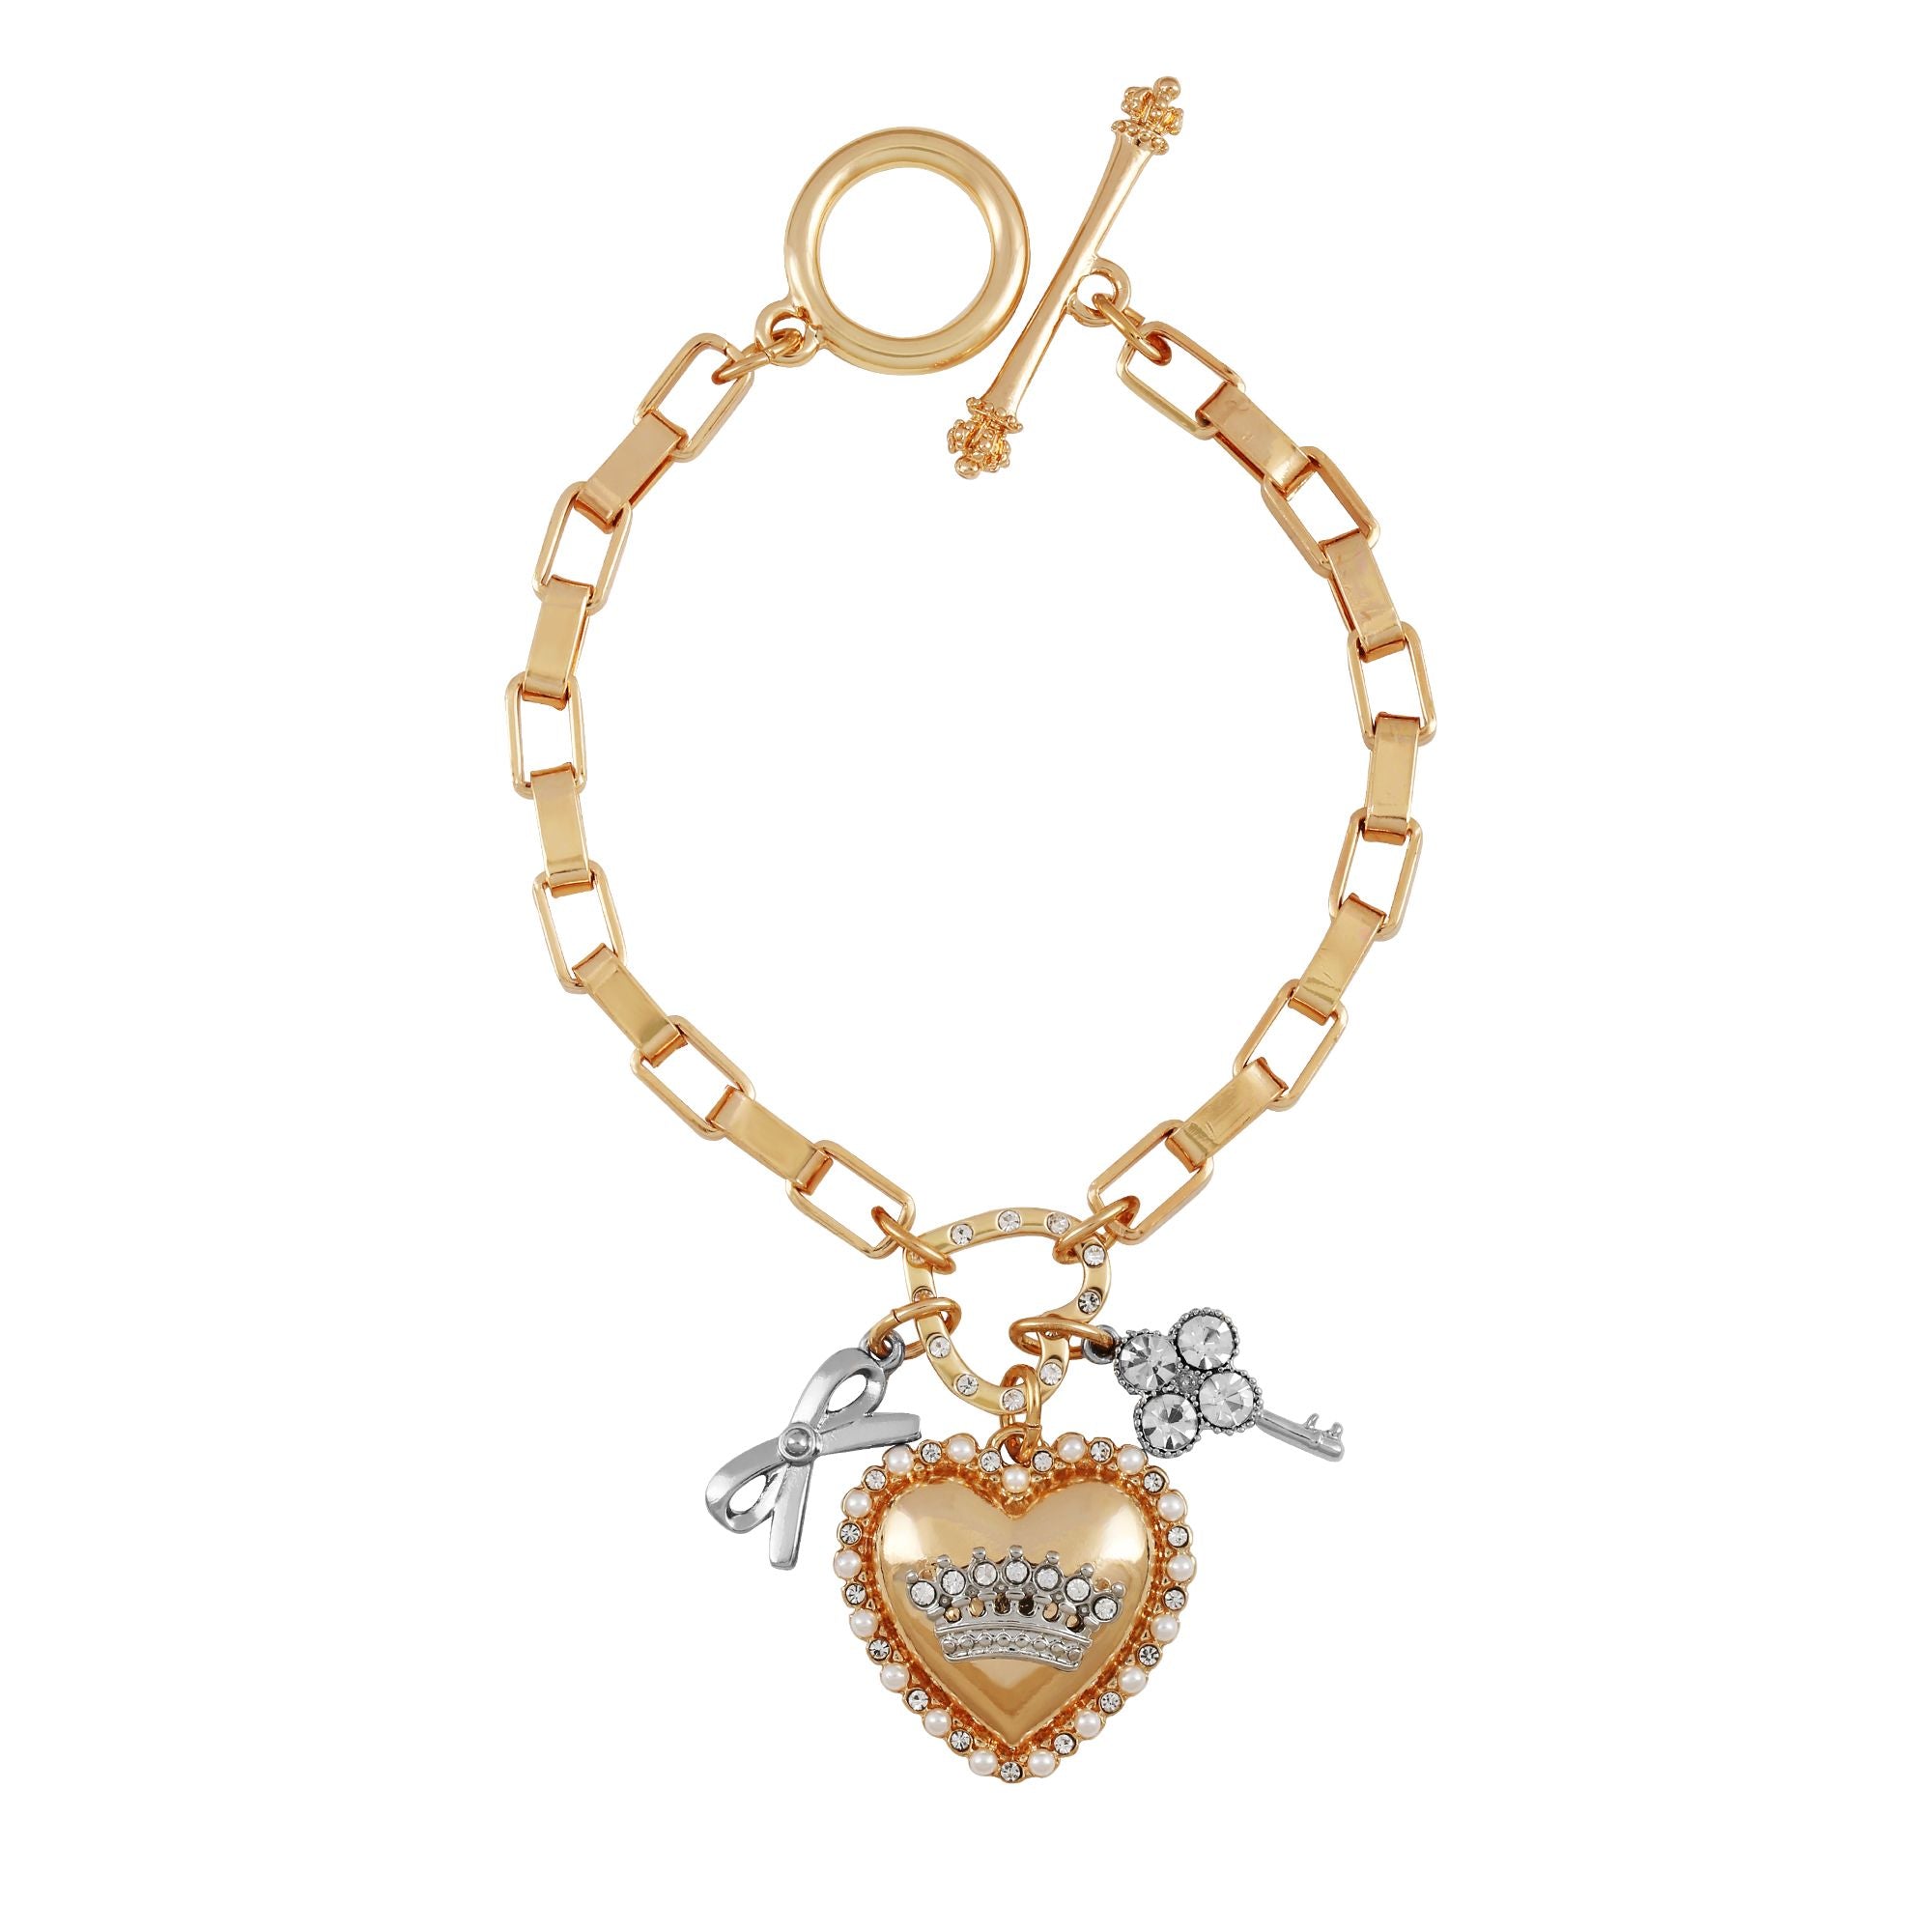 JUICY COUTURE CROWN NECKLACE FOR GIRLS.